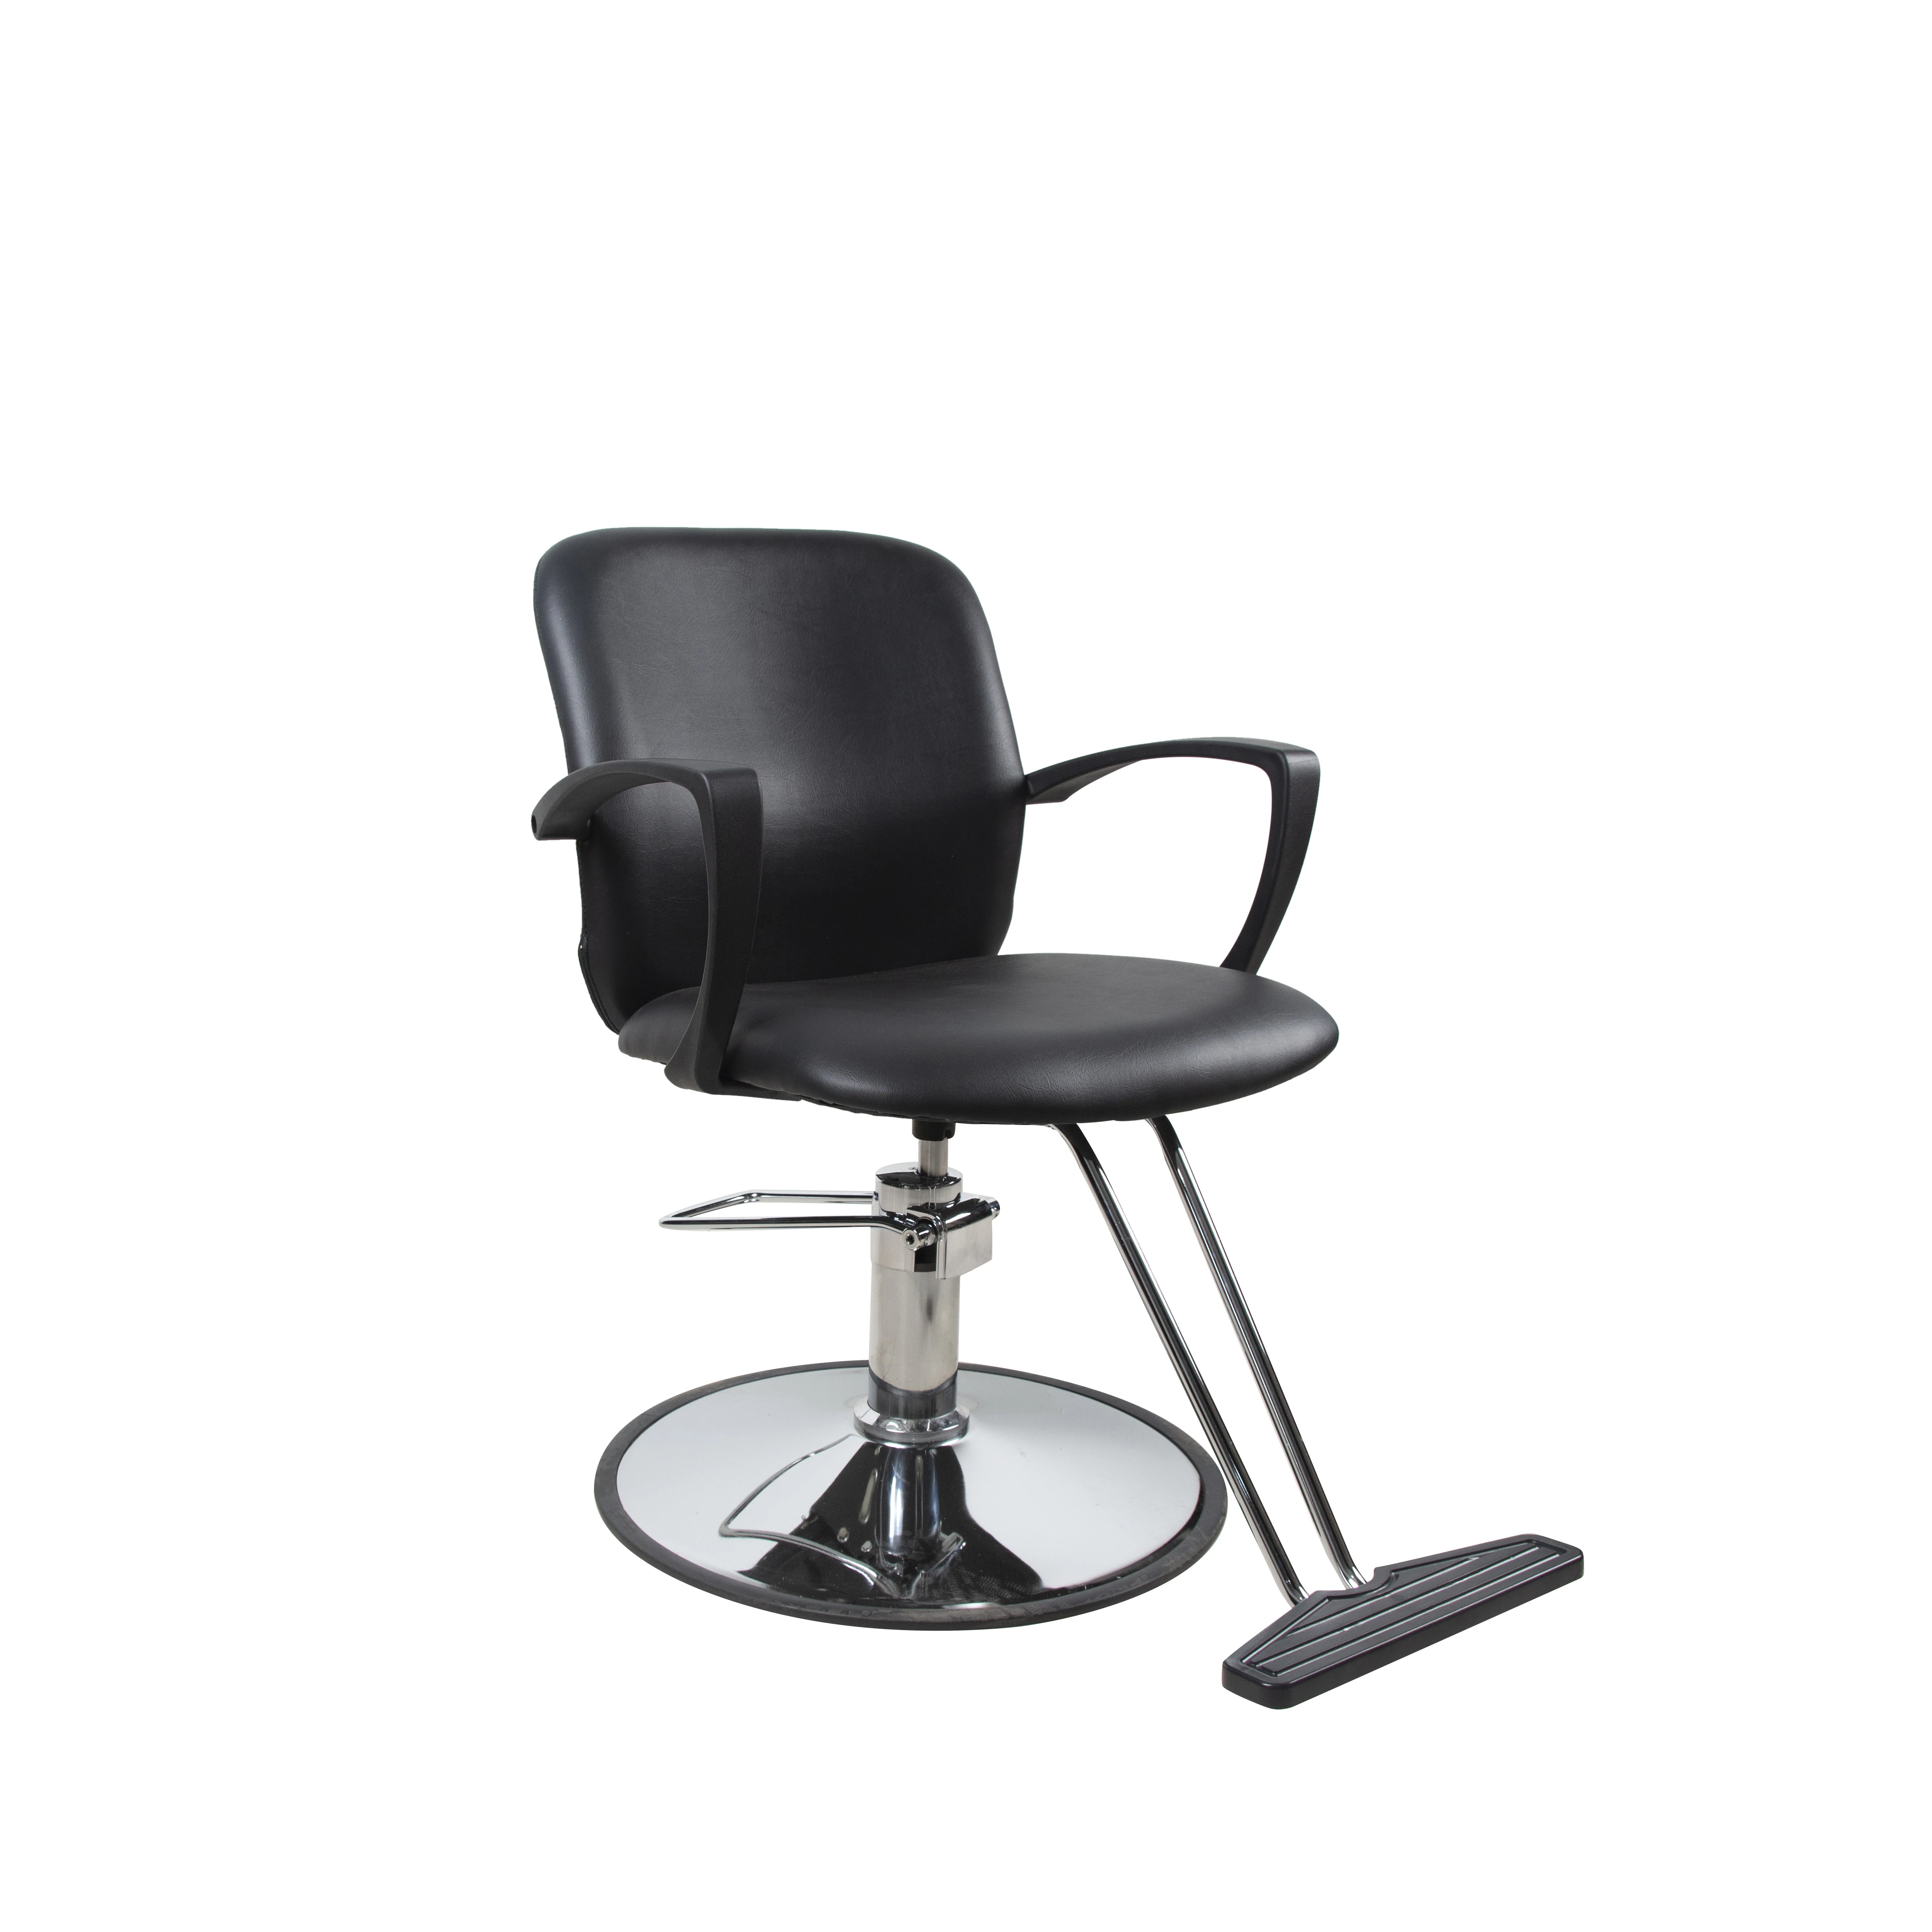 

styling morden brown salon stool chair liner spa massage multi purpose chair for beauty salon, Optional